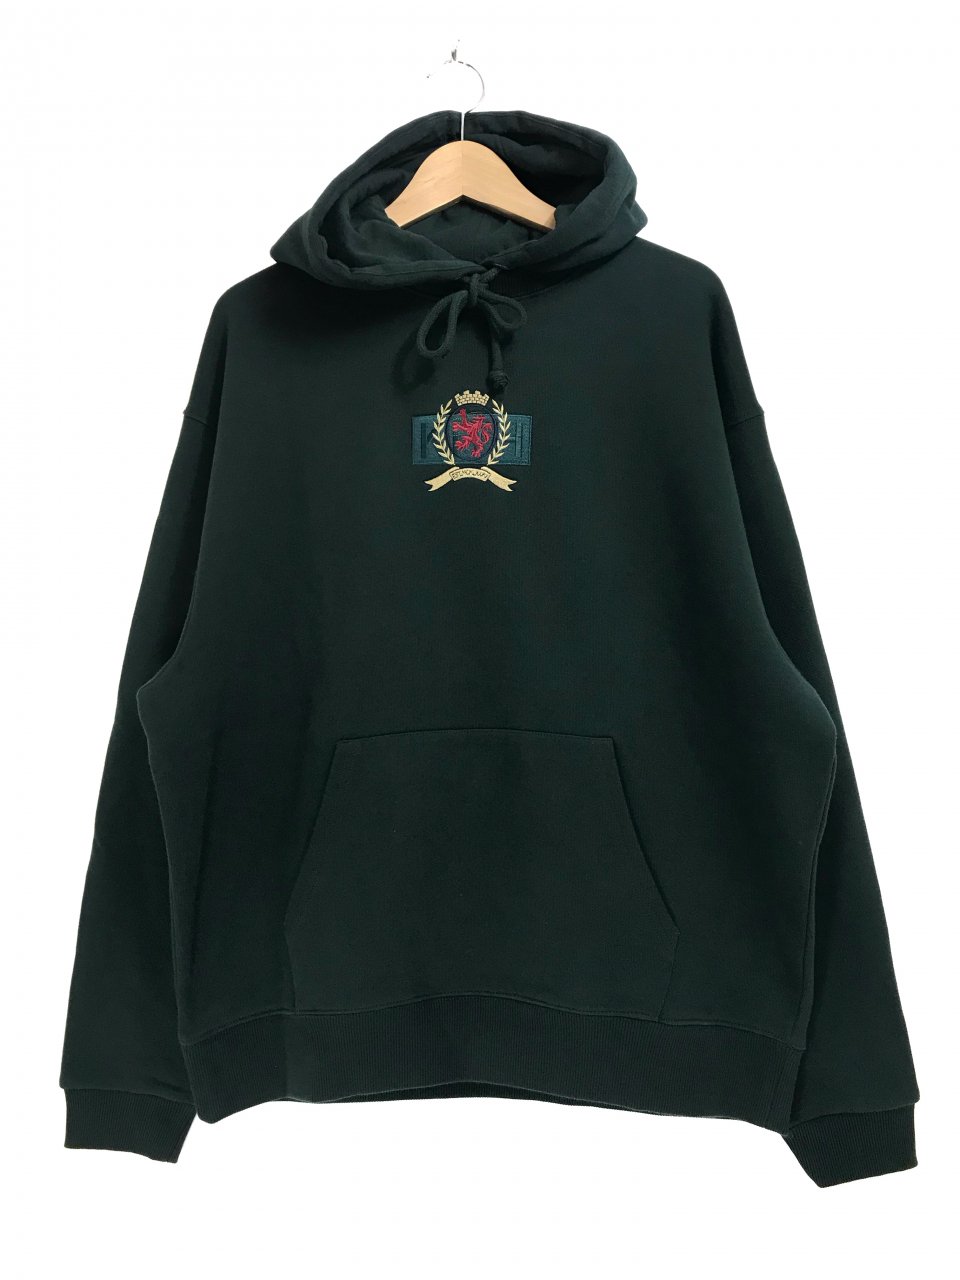 KITH × TOMMY HILFIGER CREST HOODIE (FOREST) キース キス トミーヒルフィガー クレスト フーディー  パーカー 深緑 コラボ ロニーフィーグ 18FW - NEWJOKE ONLINE STORE